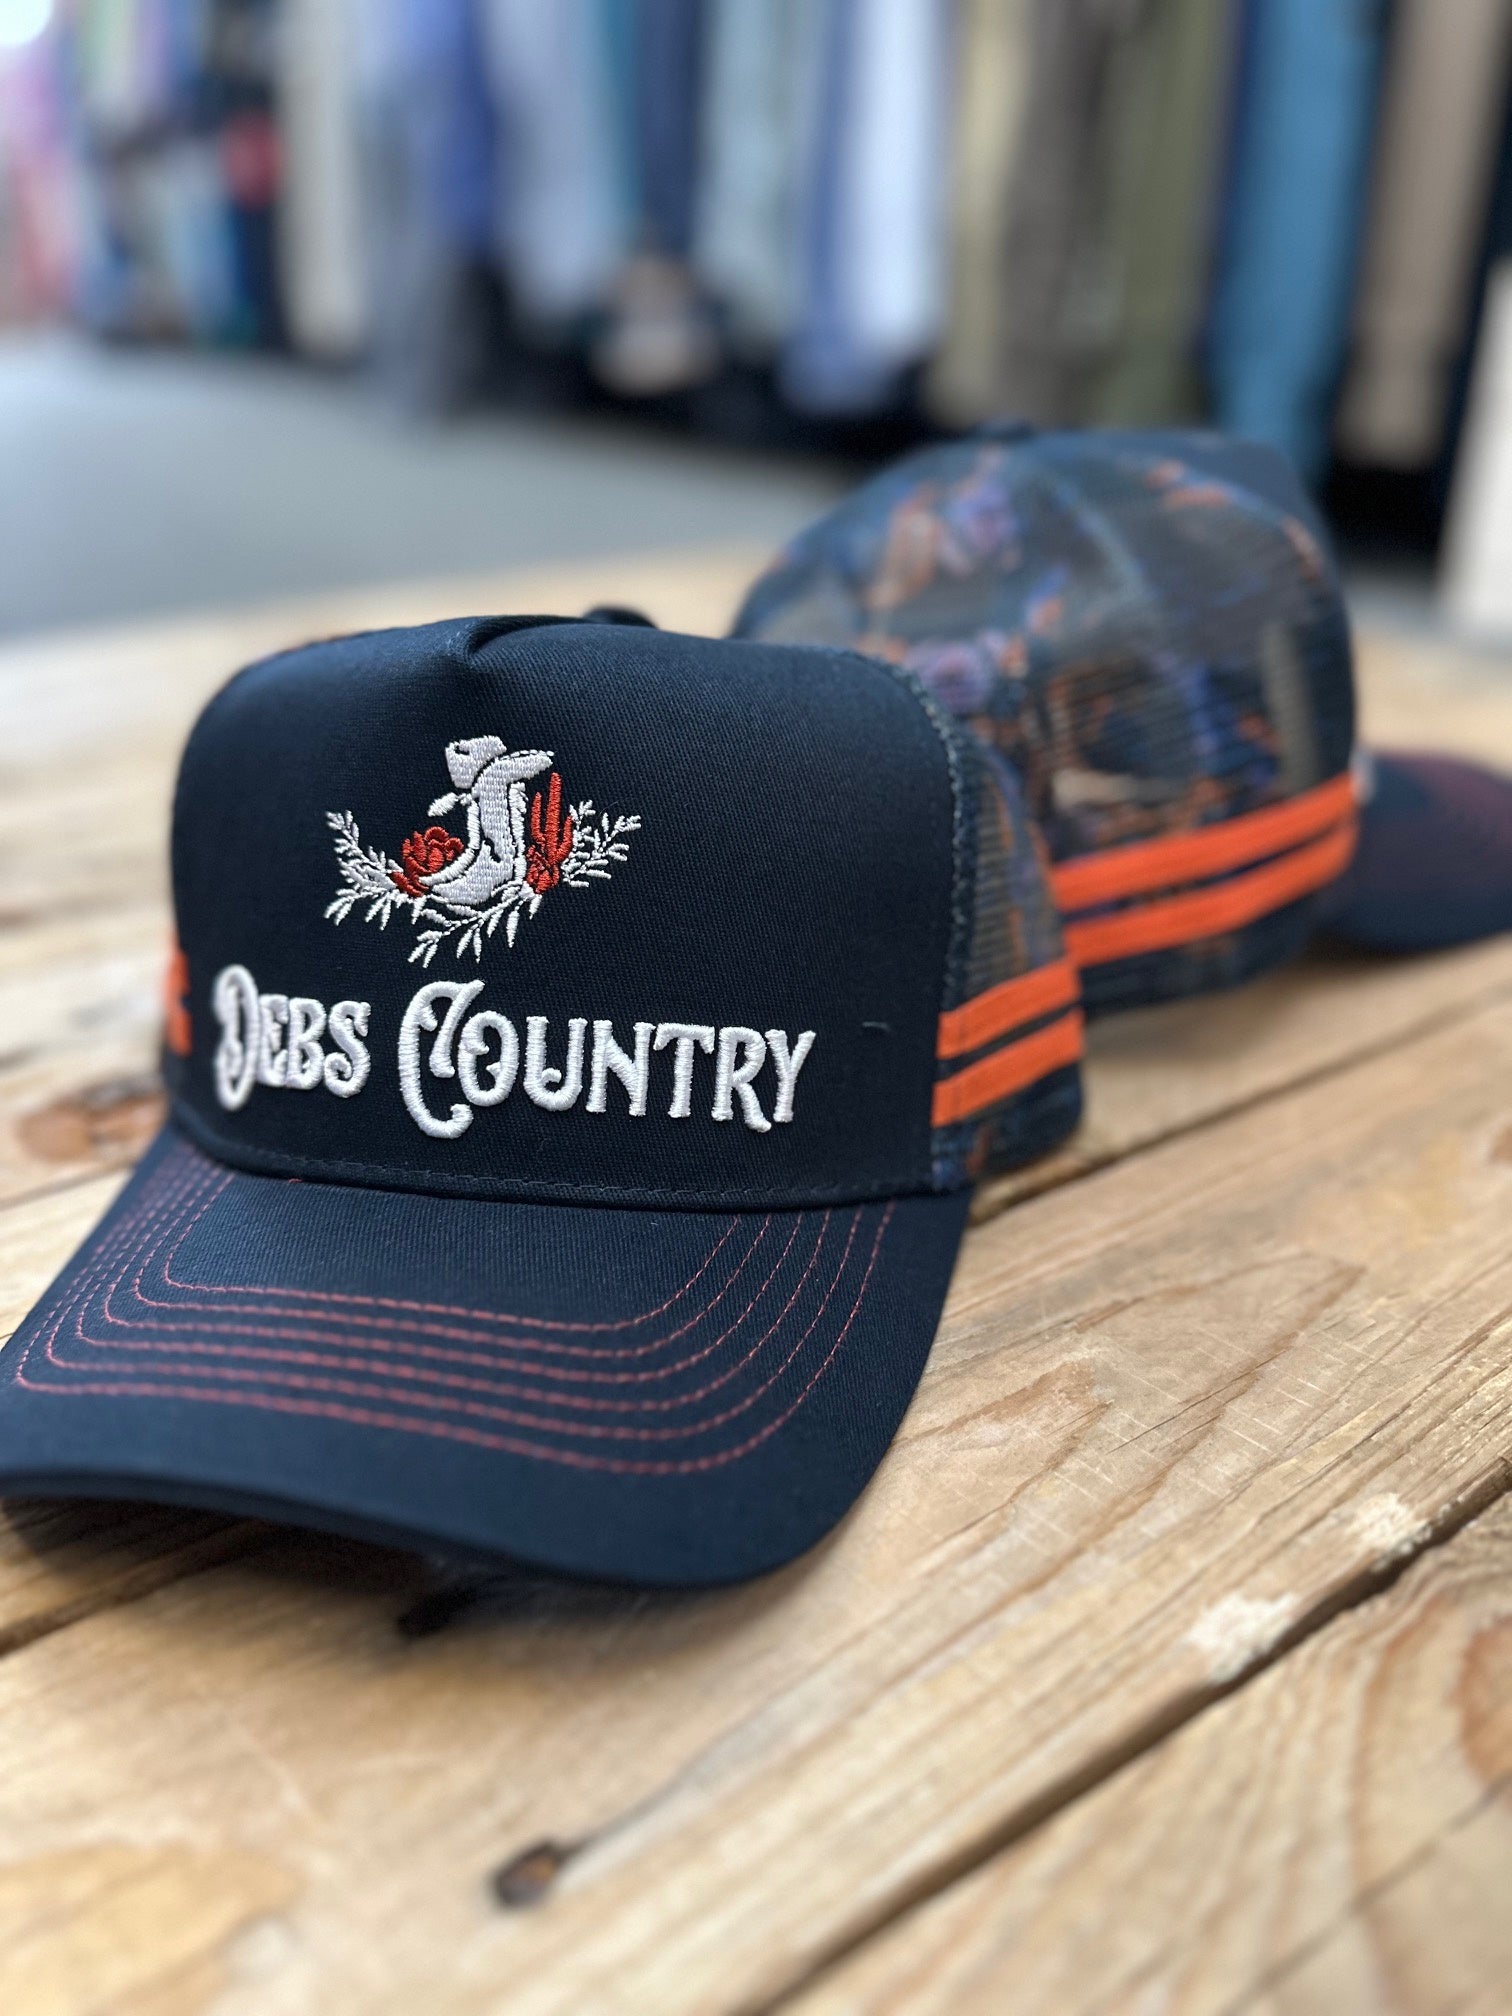 Debs Country Outfitters 'Something in the Orange' Trucker Cap (7167803621453)